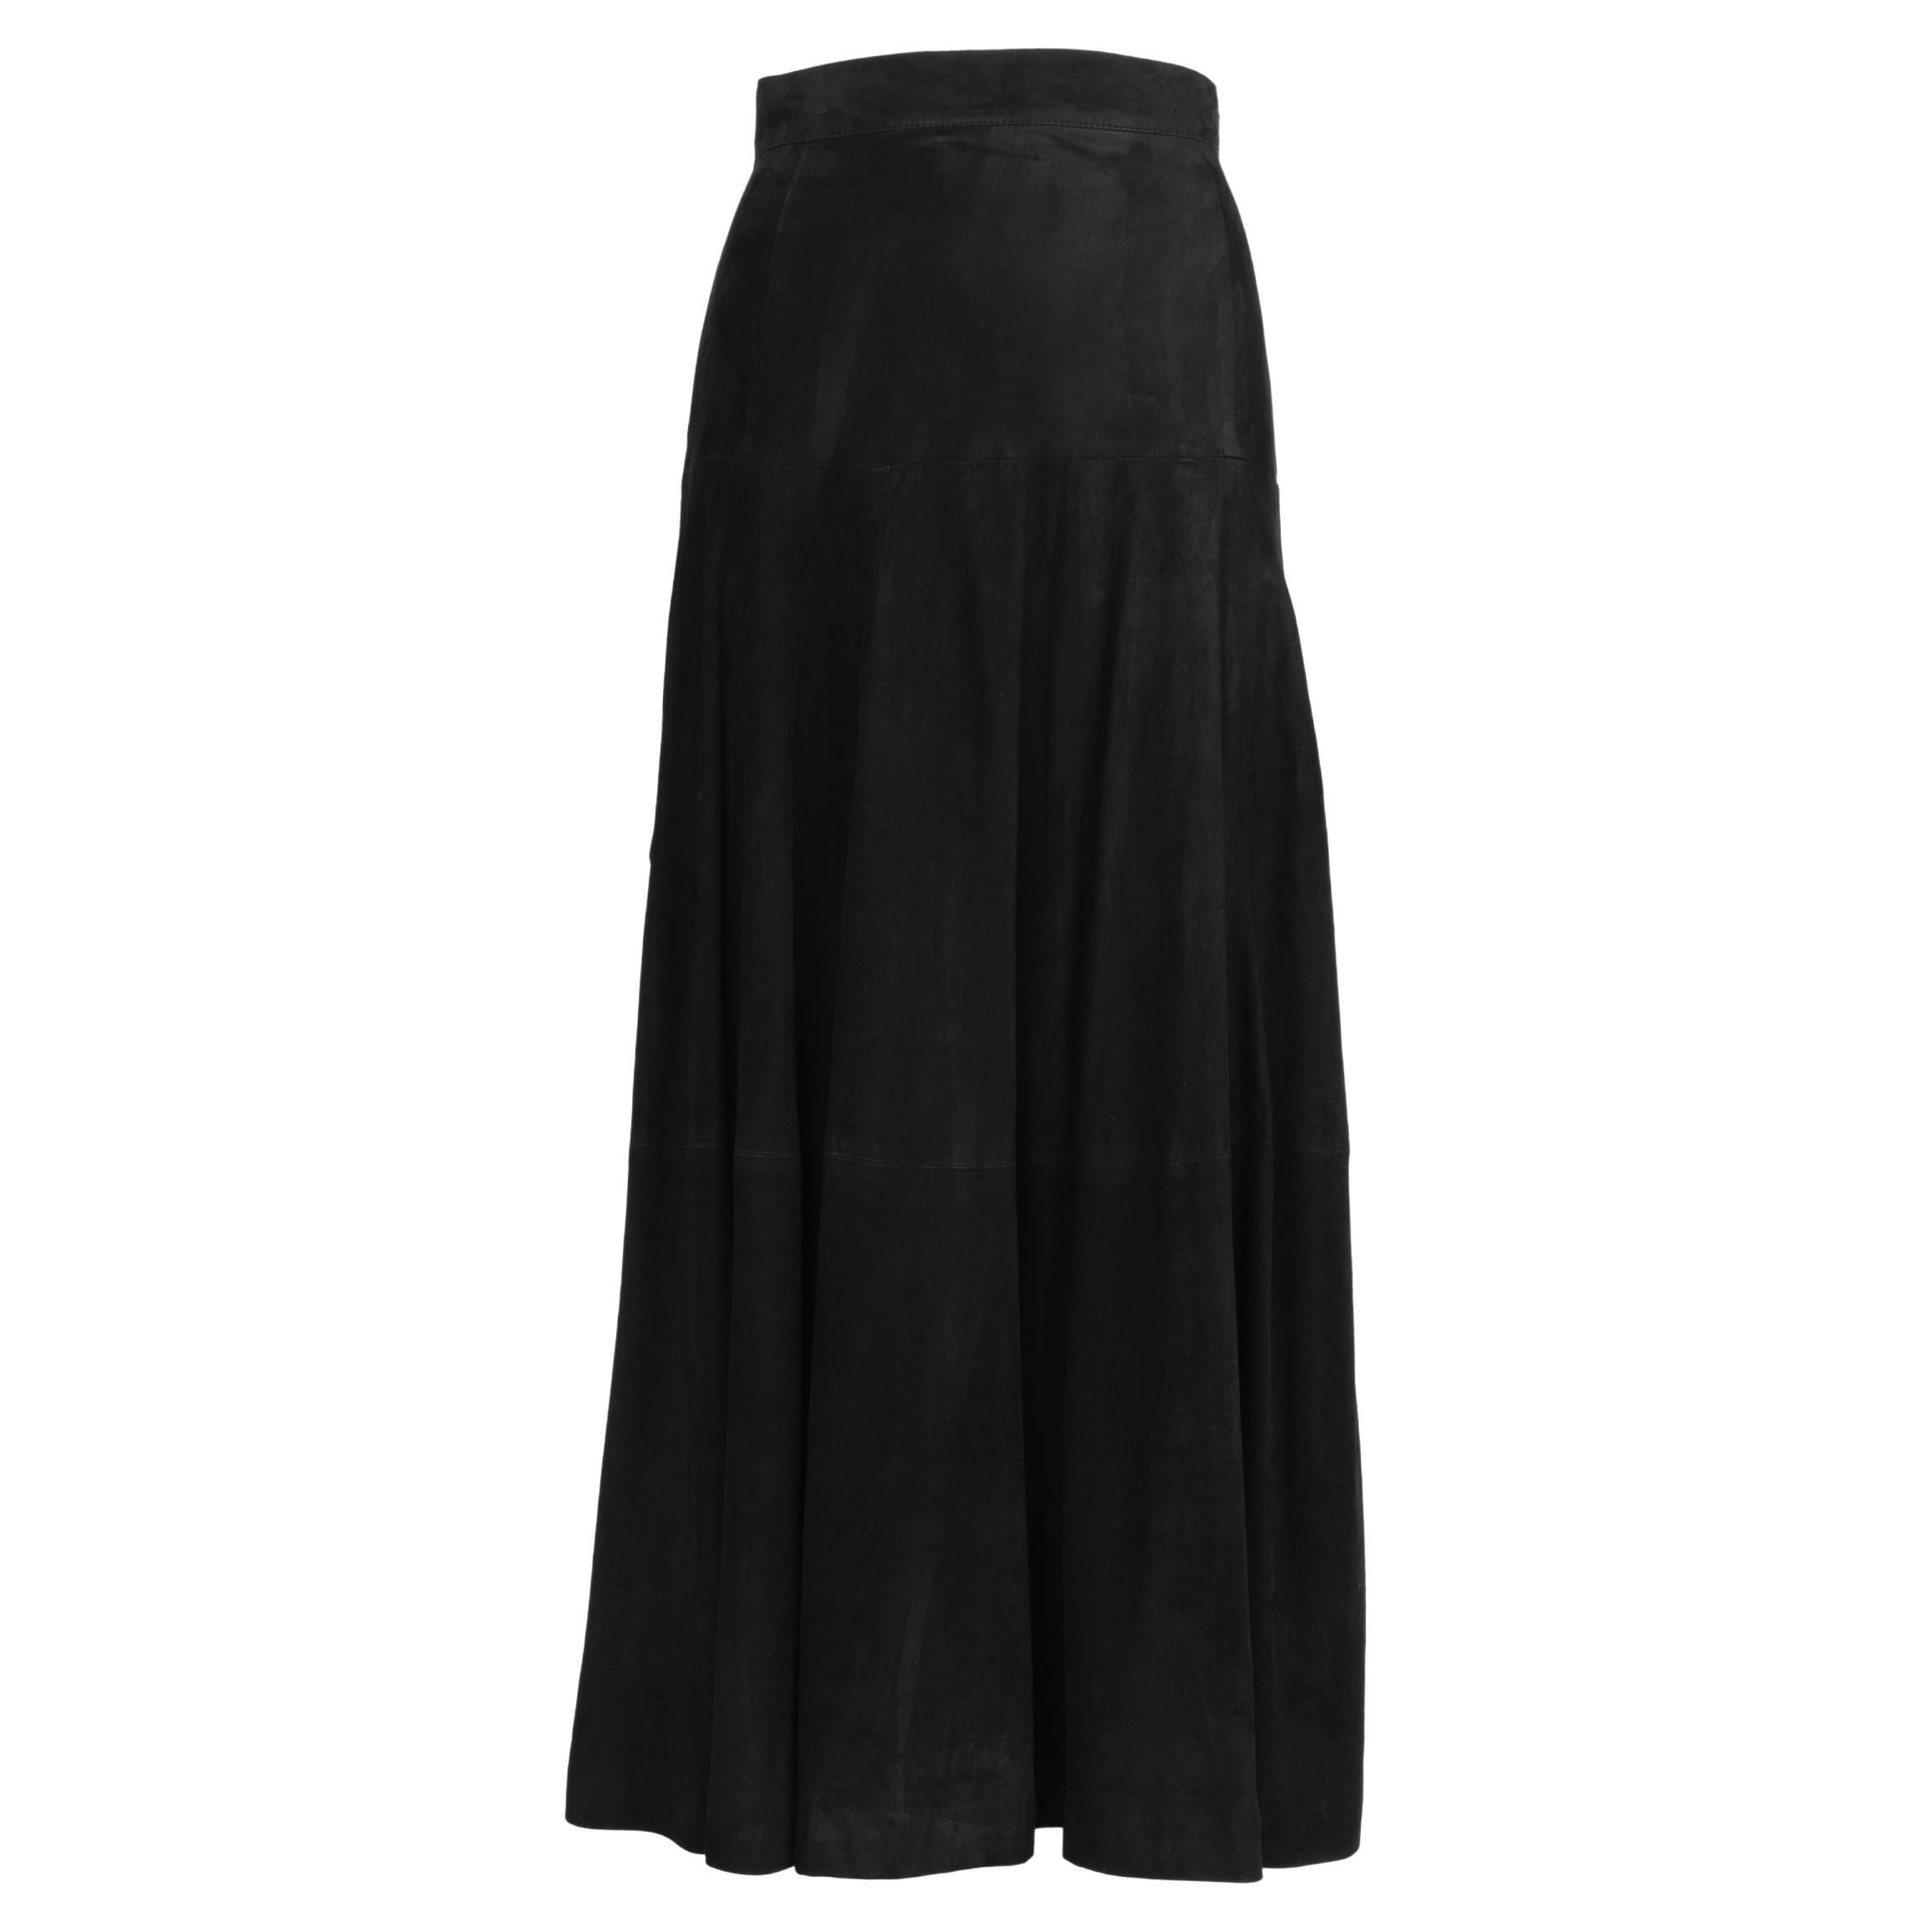  
Gianfranco Ferre
Suede Skirt  For Sale